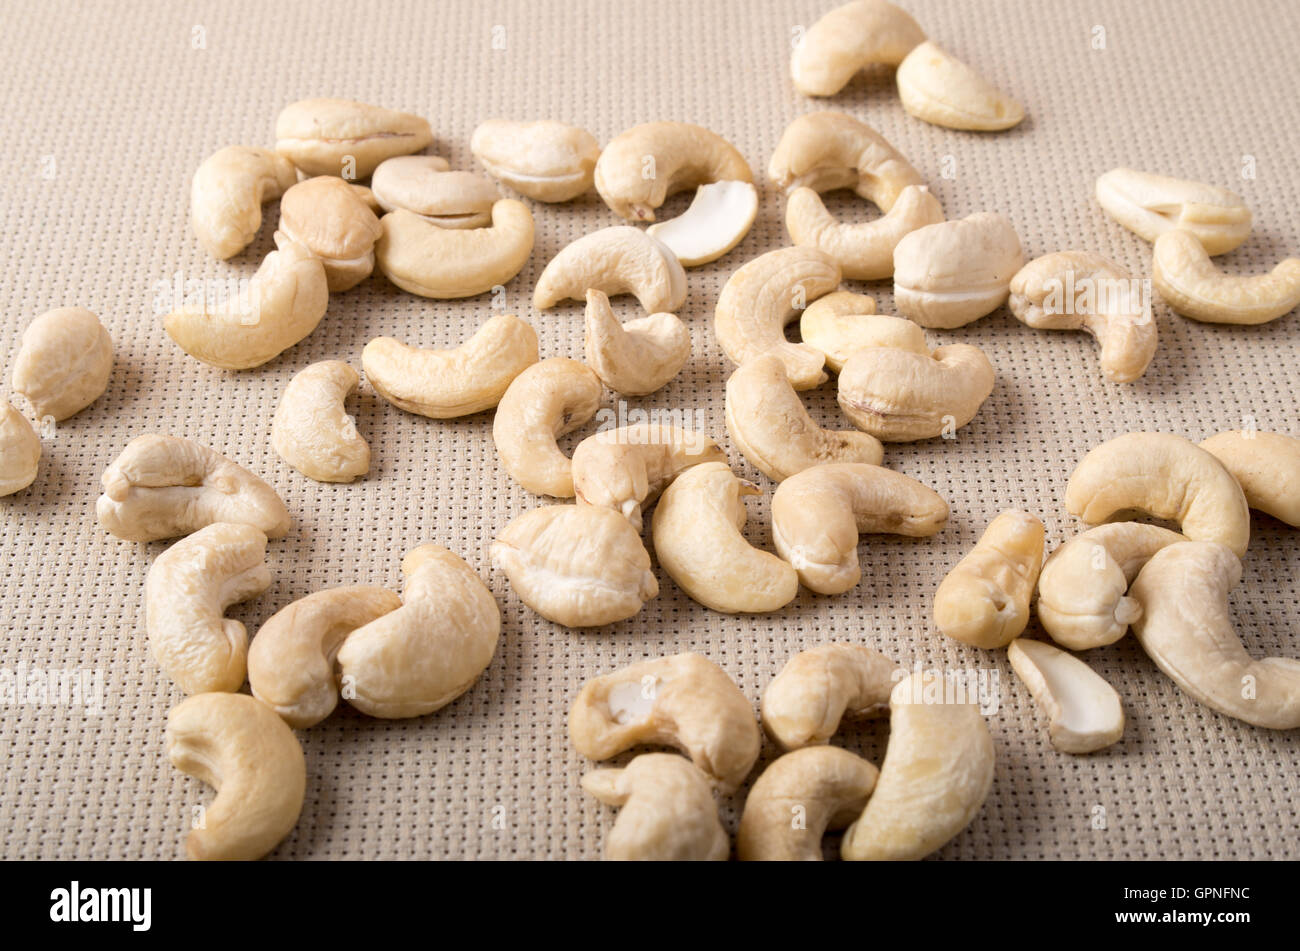 Closeup view on raw cashew nuts scattered on the surface of the table on the background of the fabric Stock Photo